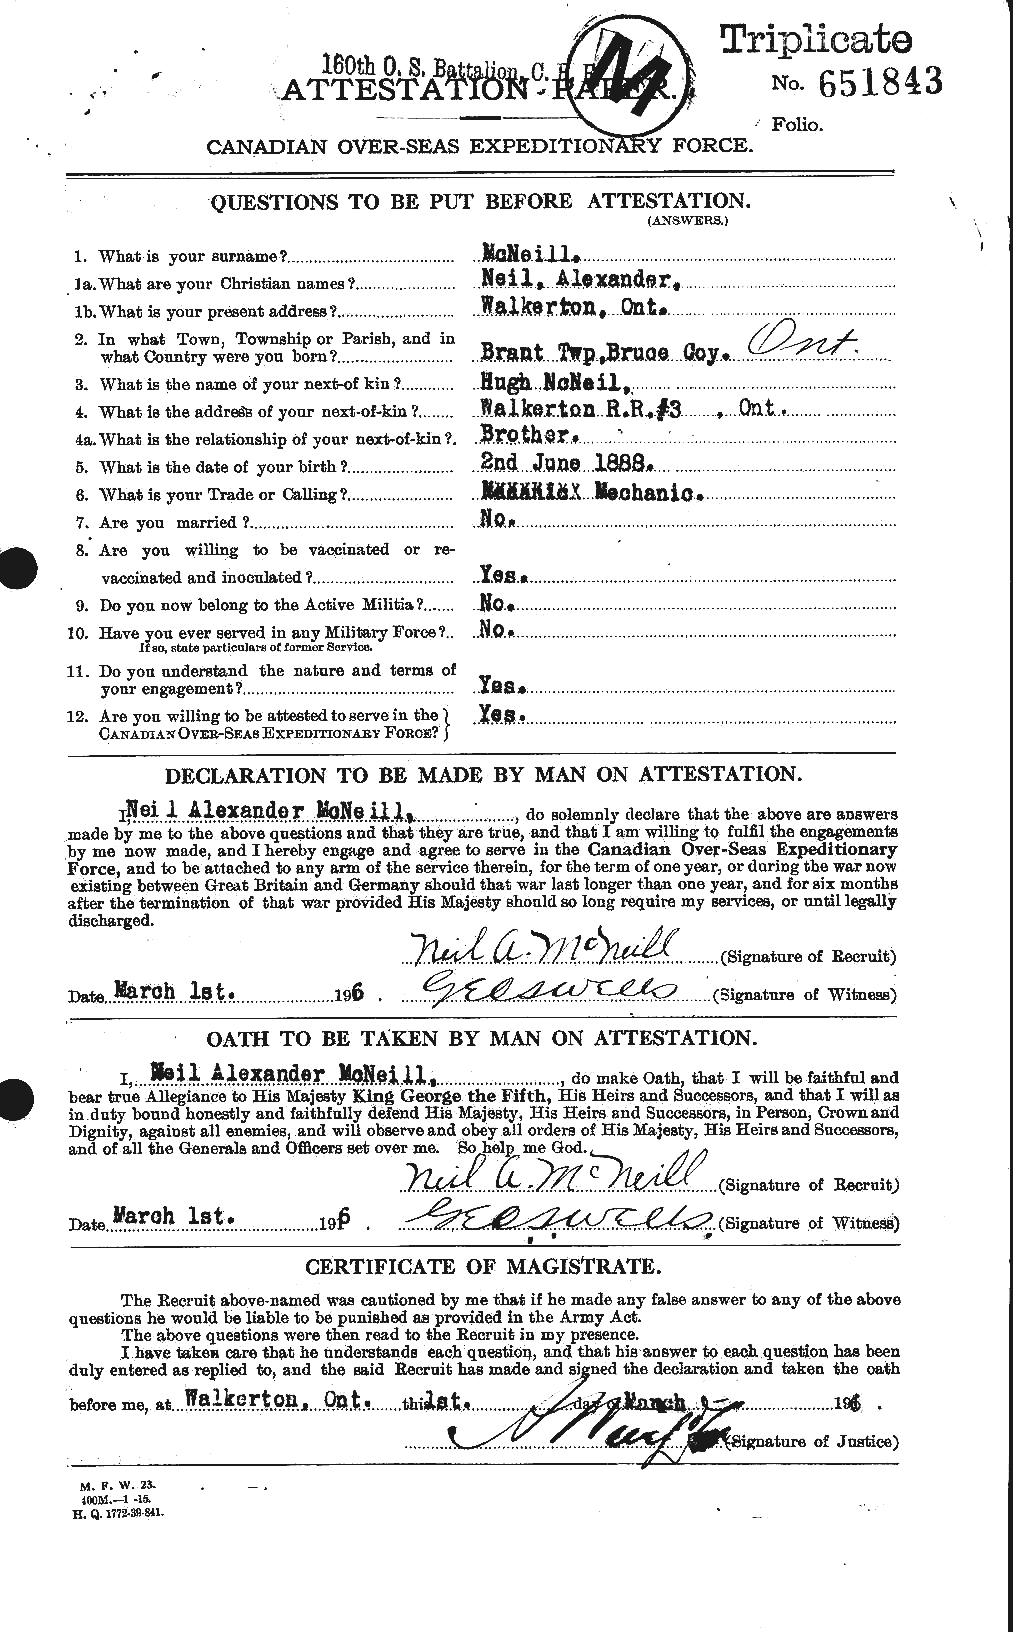 Personnel Records of the First World War - CEF 539010a